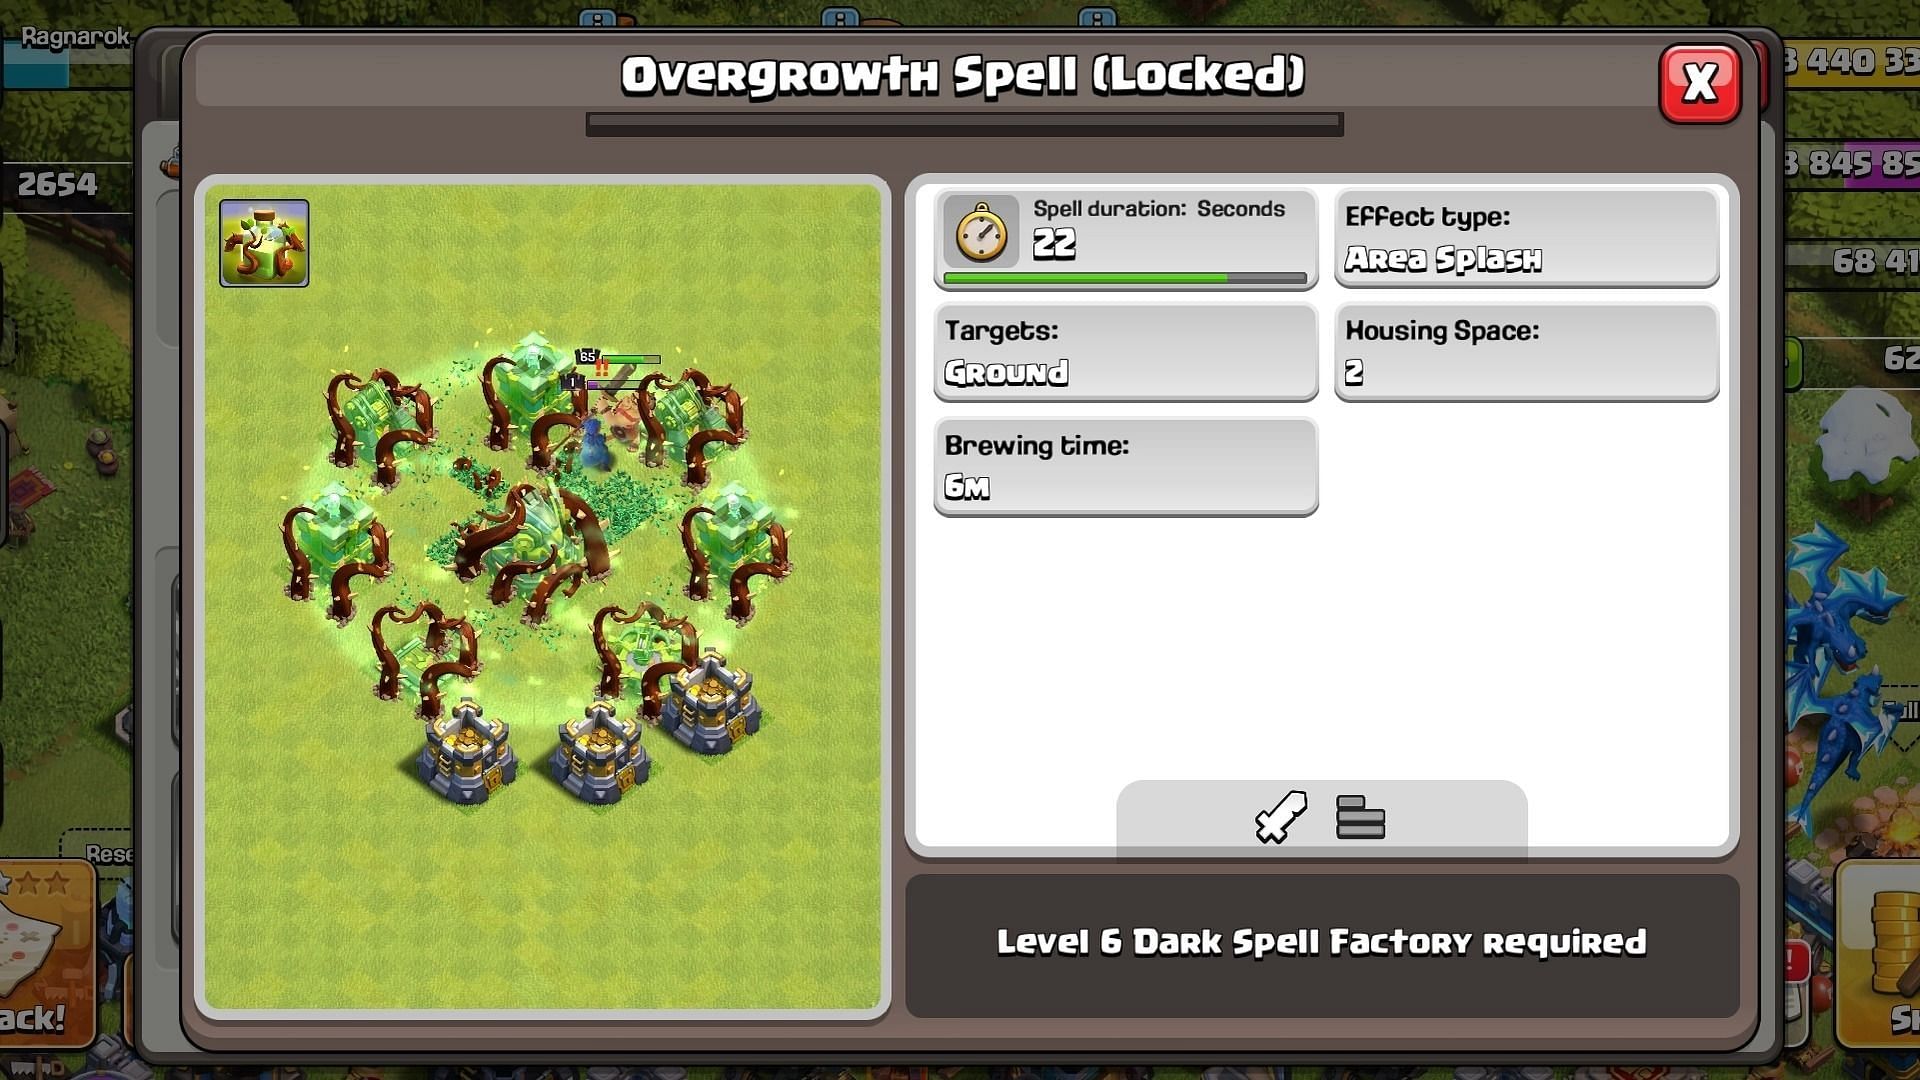 New Overgrowth Spell (Image via Supercell)